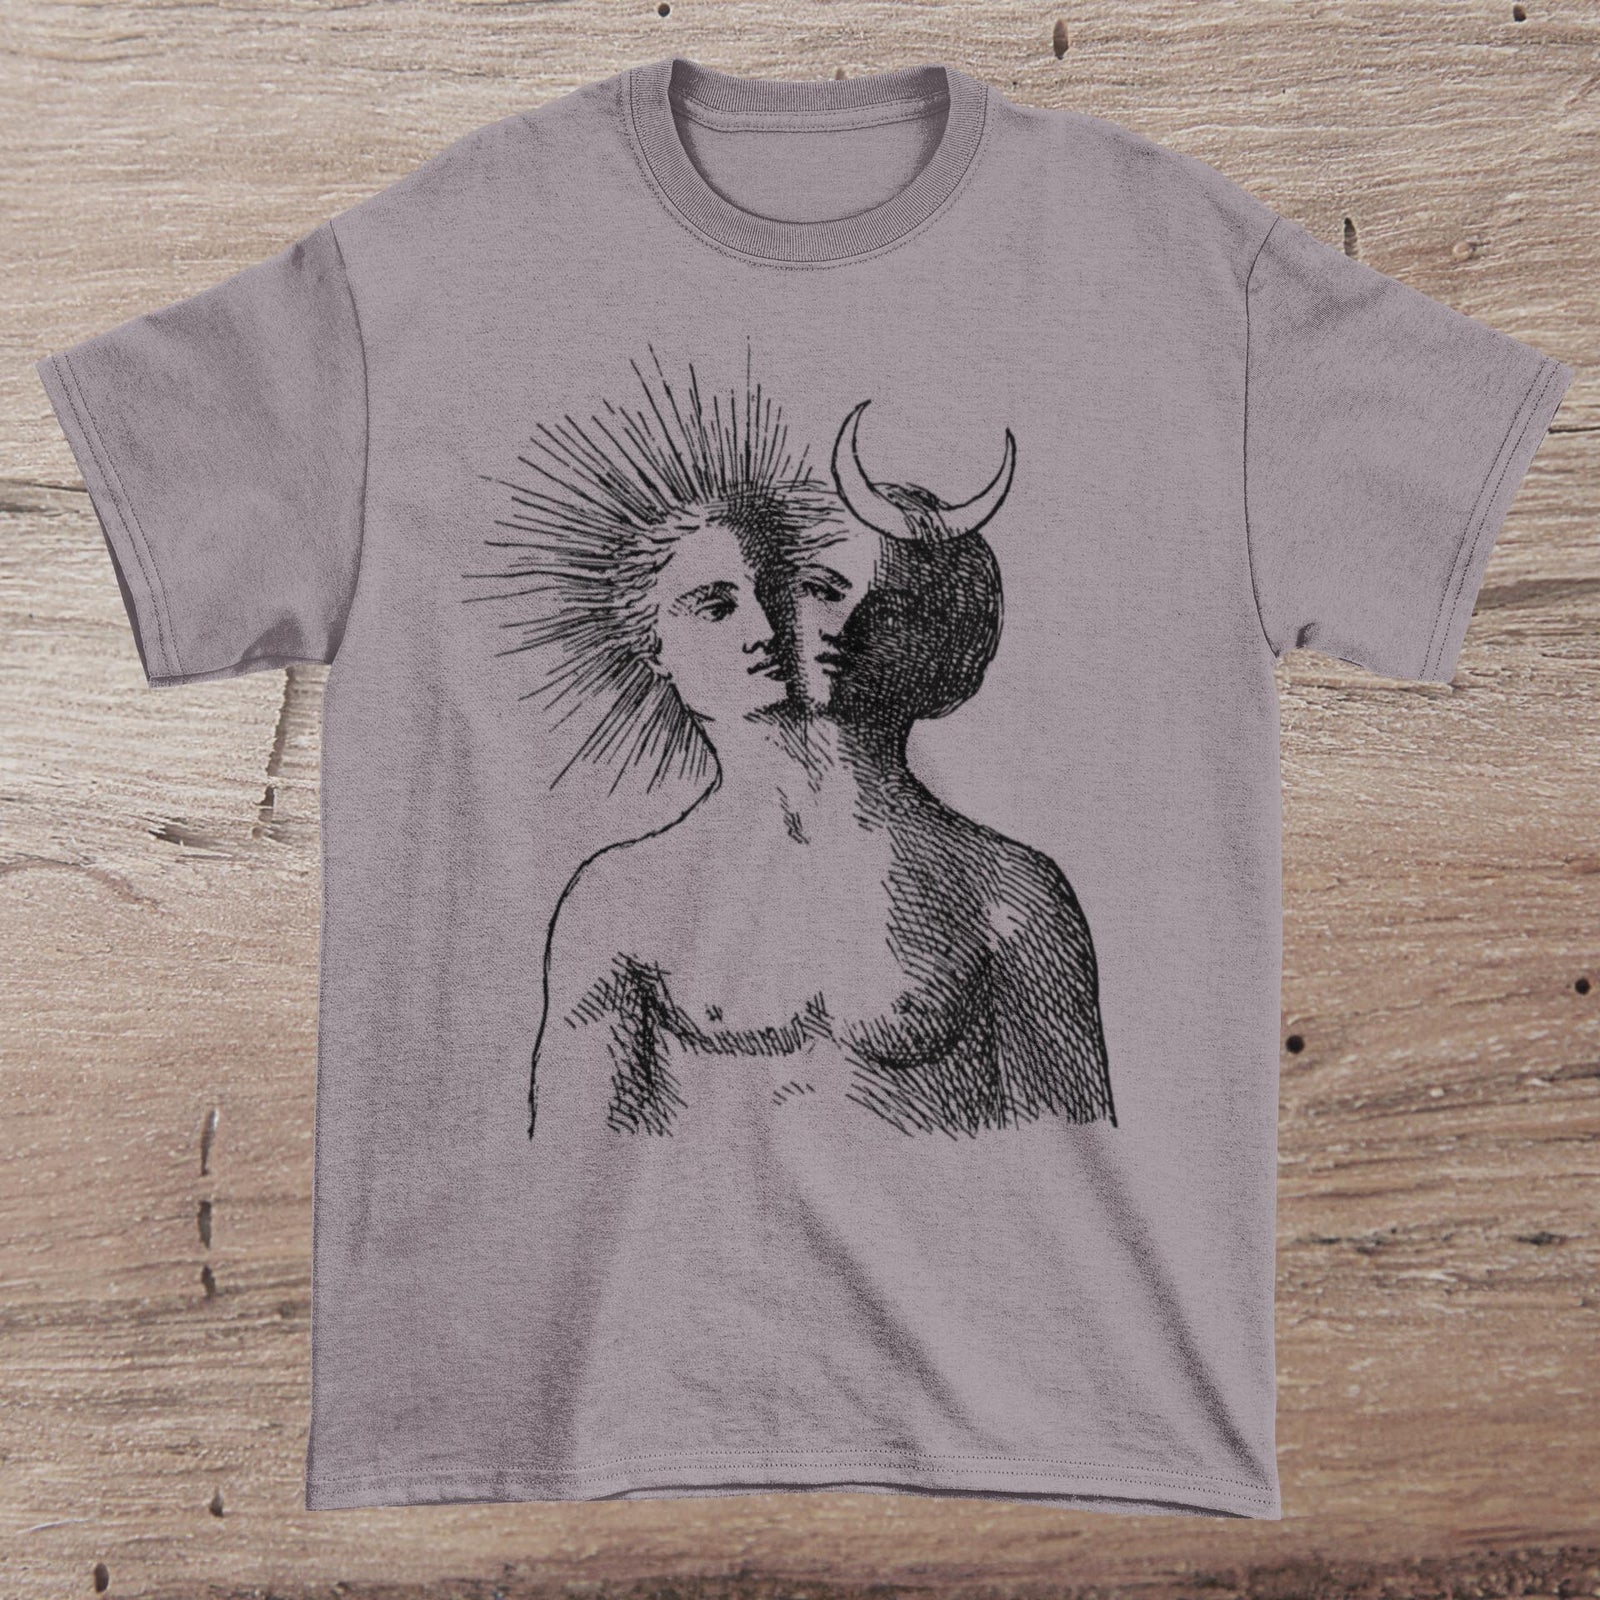 T-Shirts 2XL / Storm The Alchemical Rebis, Philosophers Stone, Esoteric Occult Androgynous Graphic Art T-Shirt